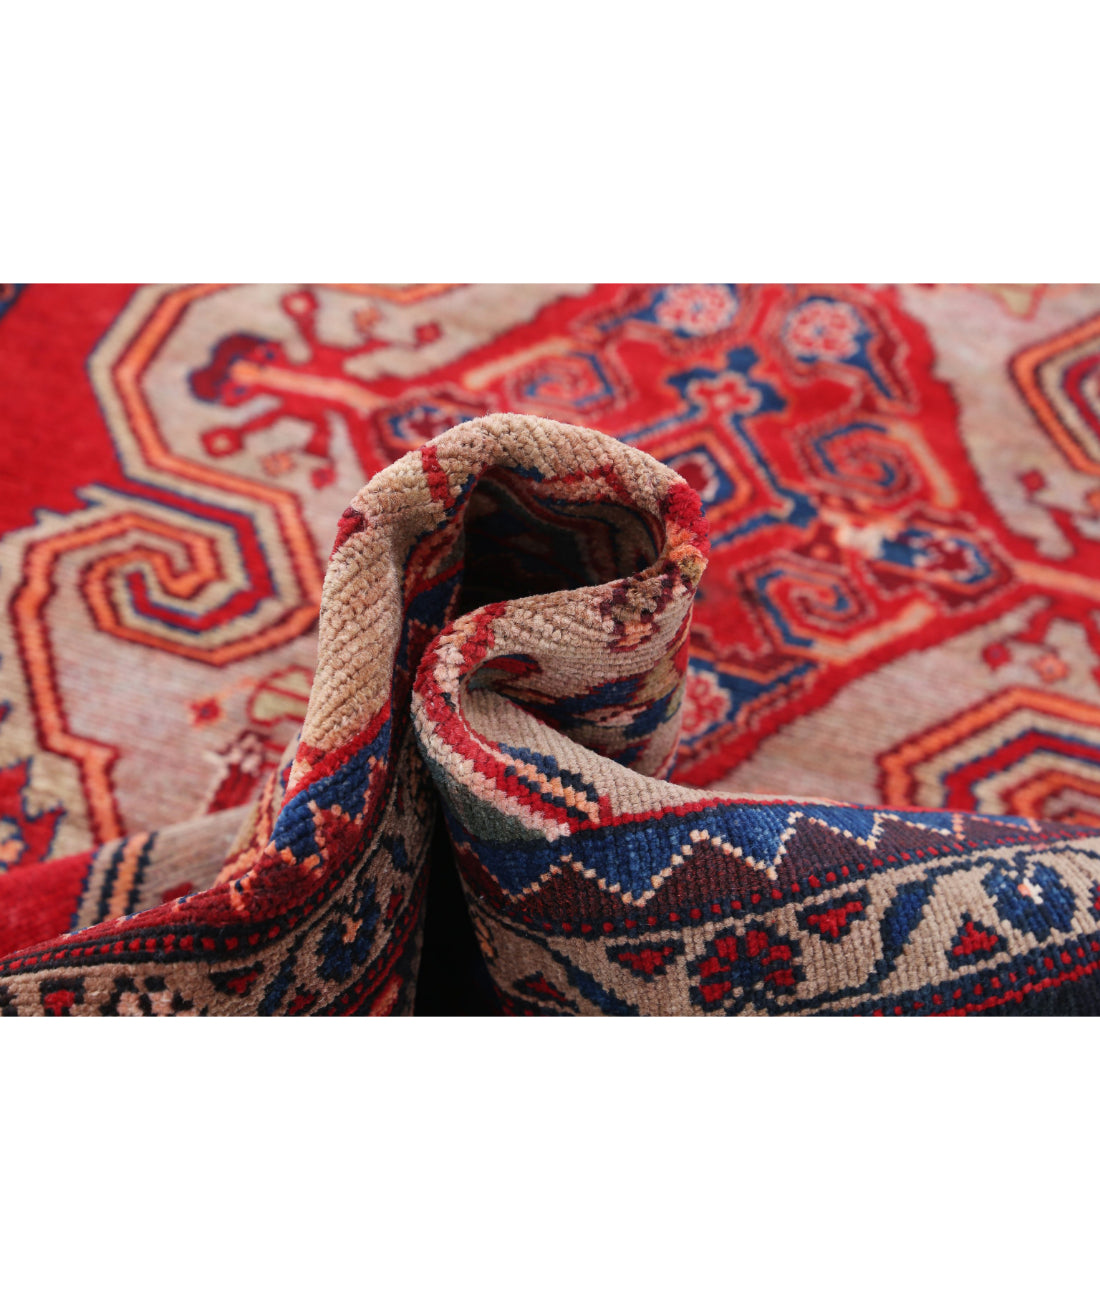 Hand Knotted Persian Hamadan Wool Rug - 4'7'' x 8'9'' 4'7'' x 8'9'' (138 X 263) / Red / Blue